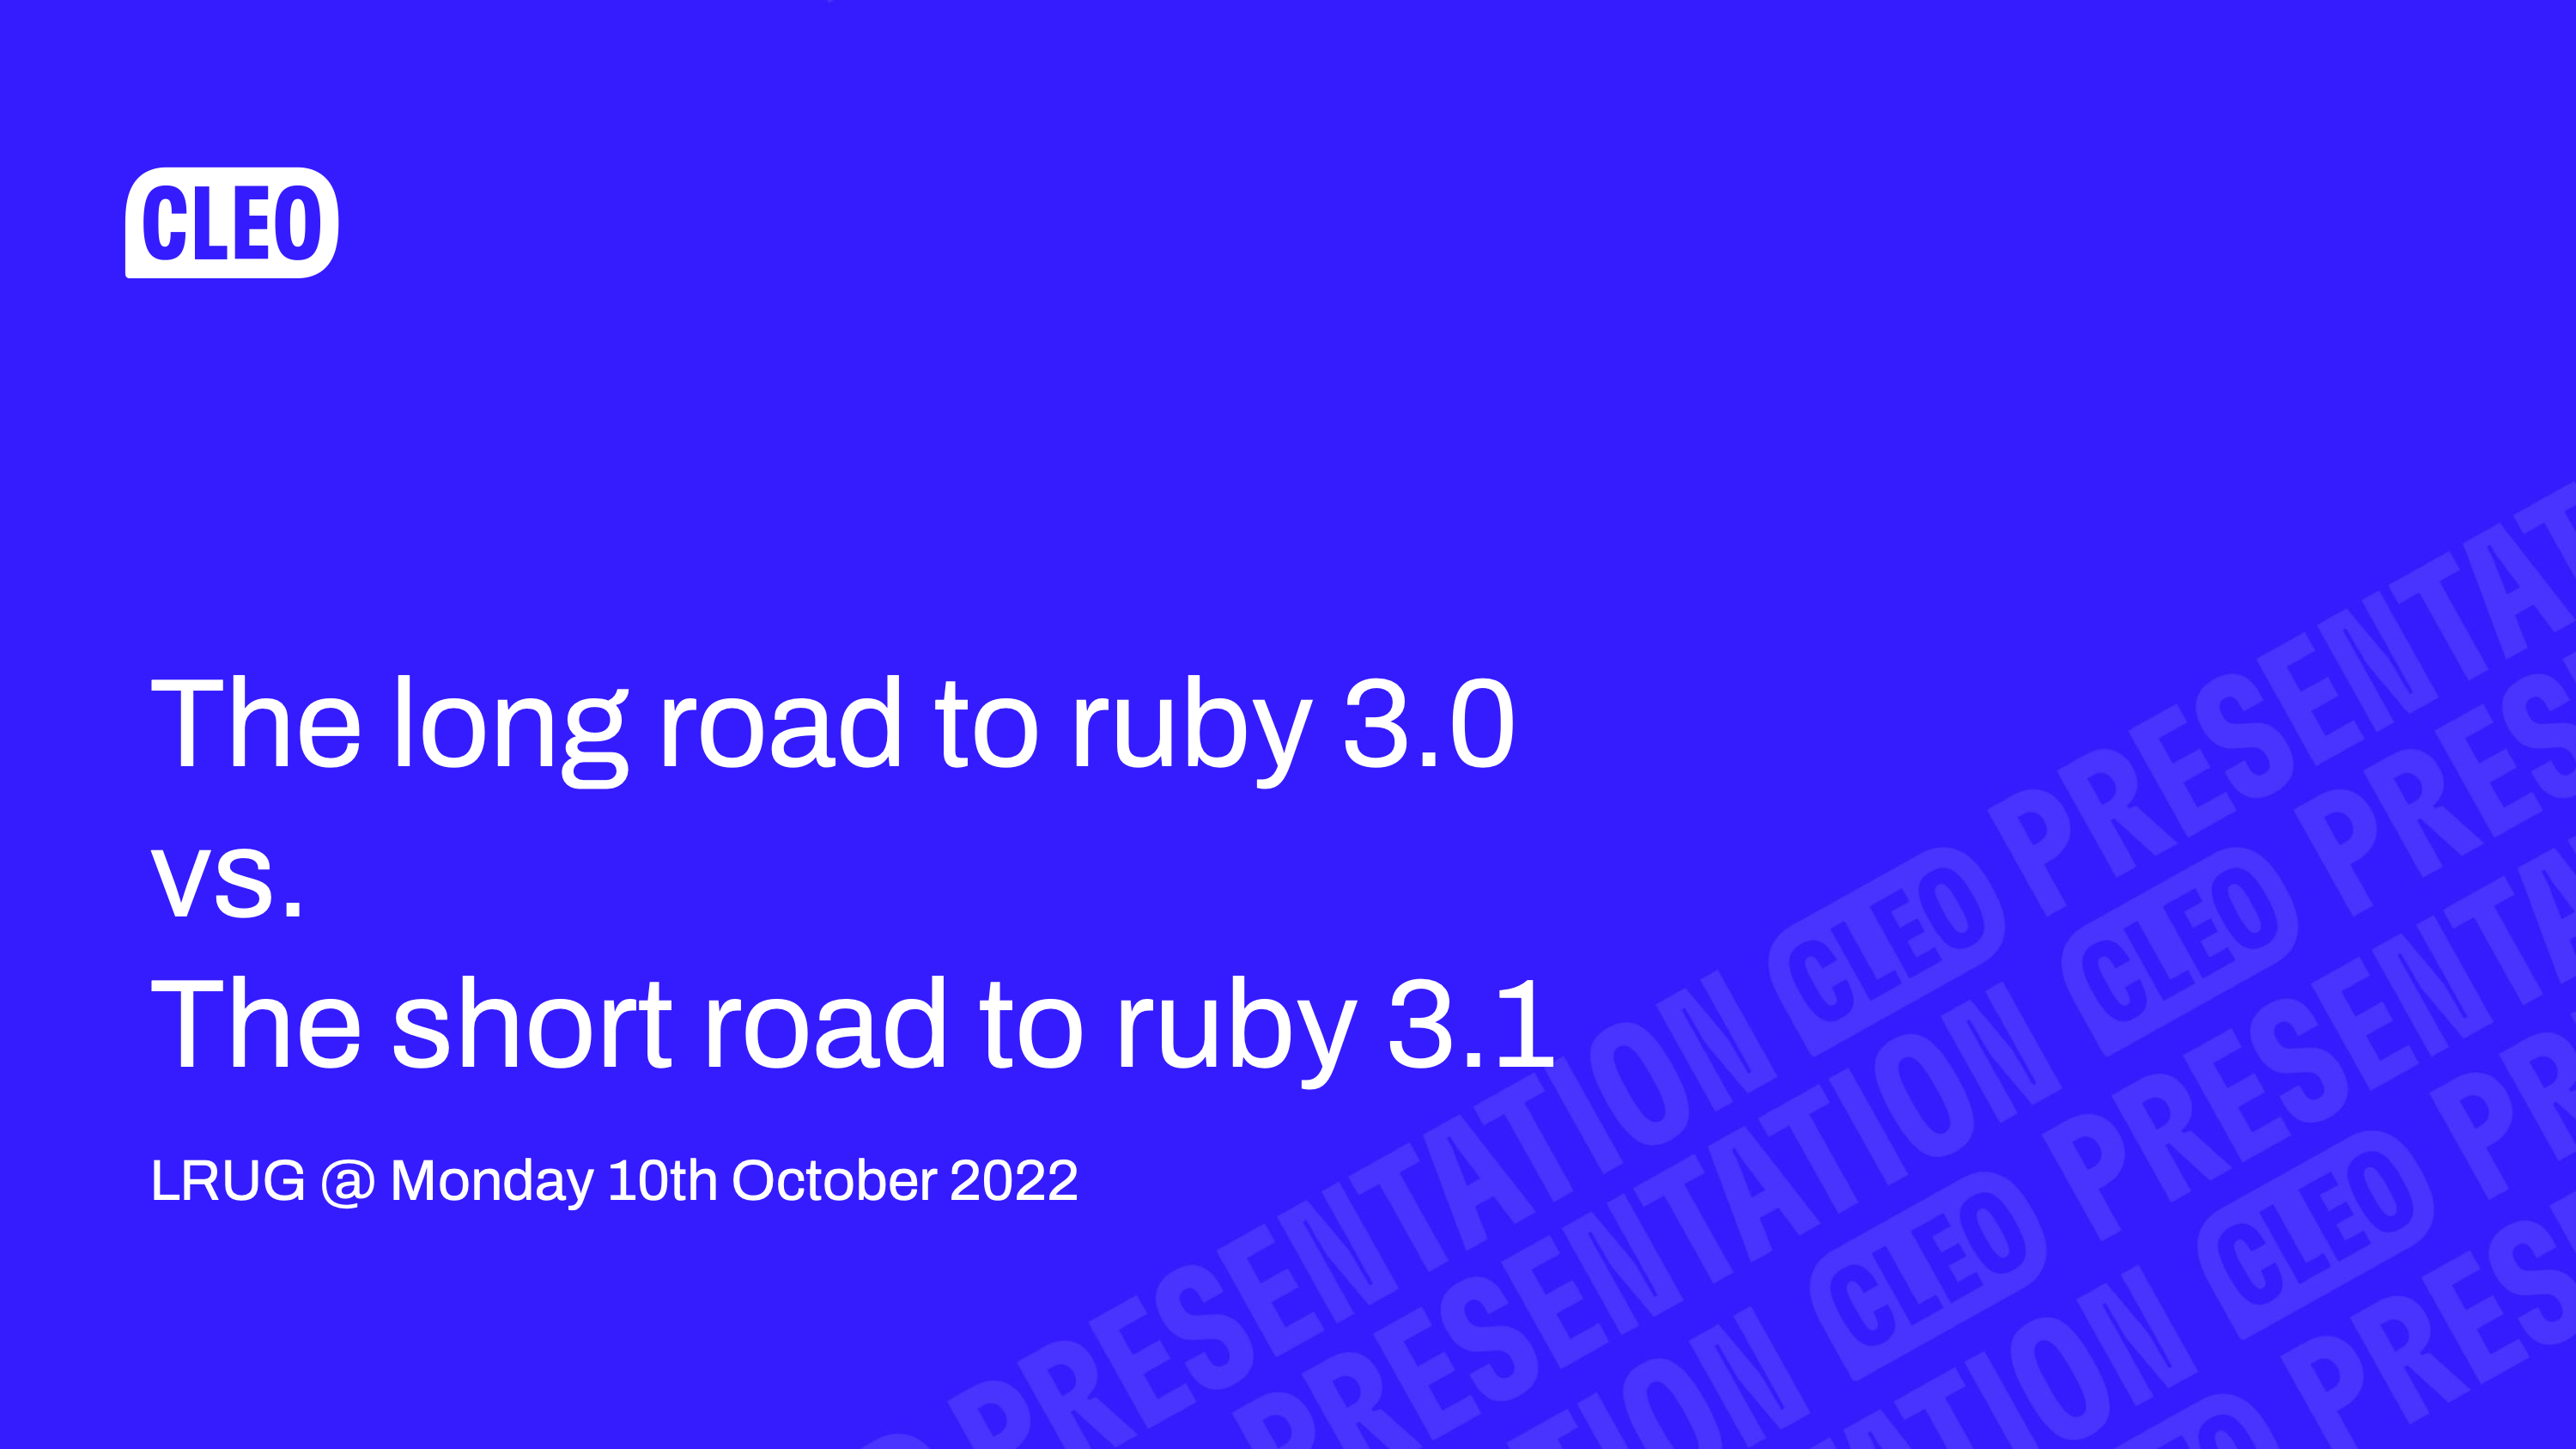 text: Cleo, The long road to ruby 3.0 vs. the short road to ruby 3.1, LRUG @ Monday 10th October 2022,